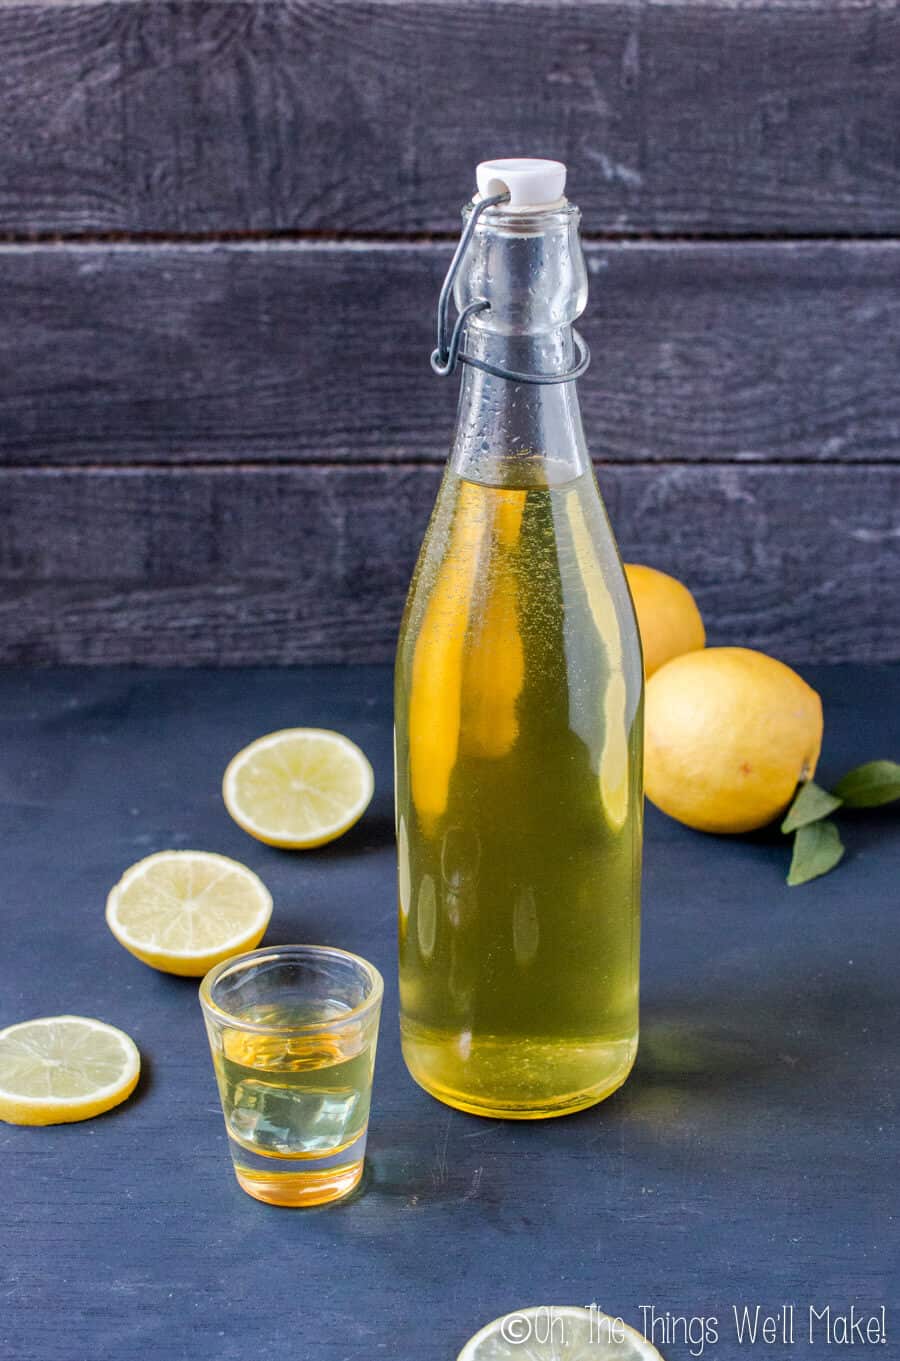 A bottle of homemade limoncello that is yellow in color